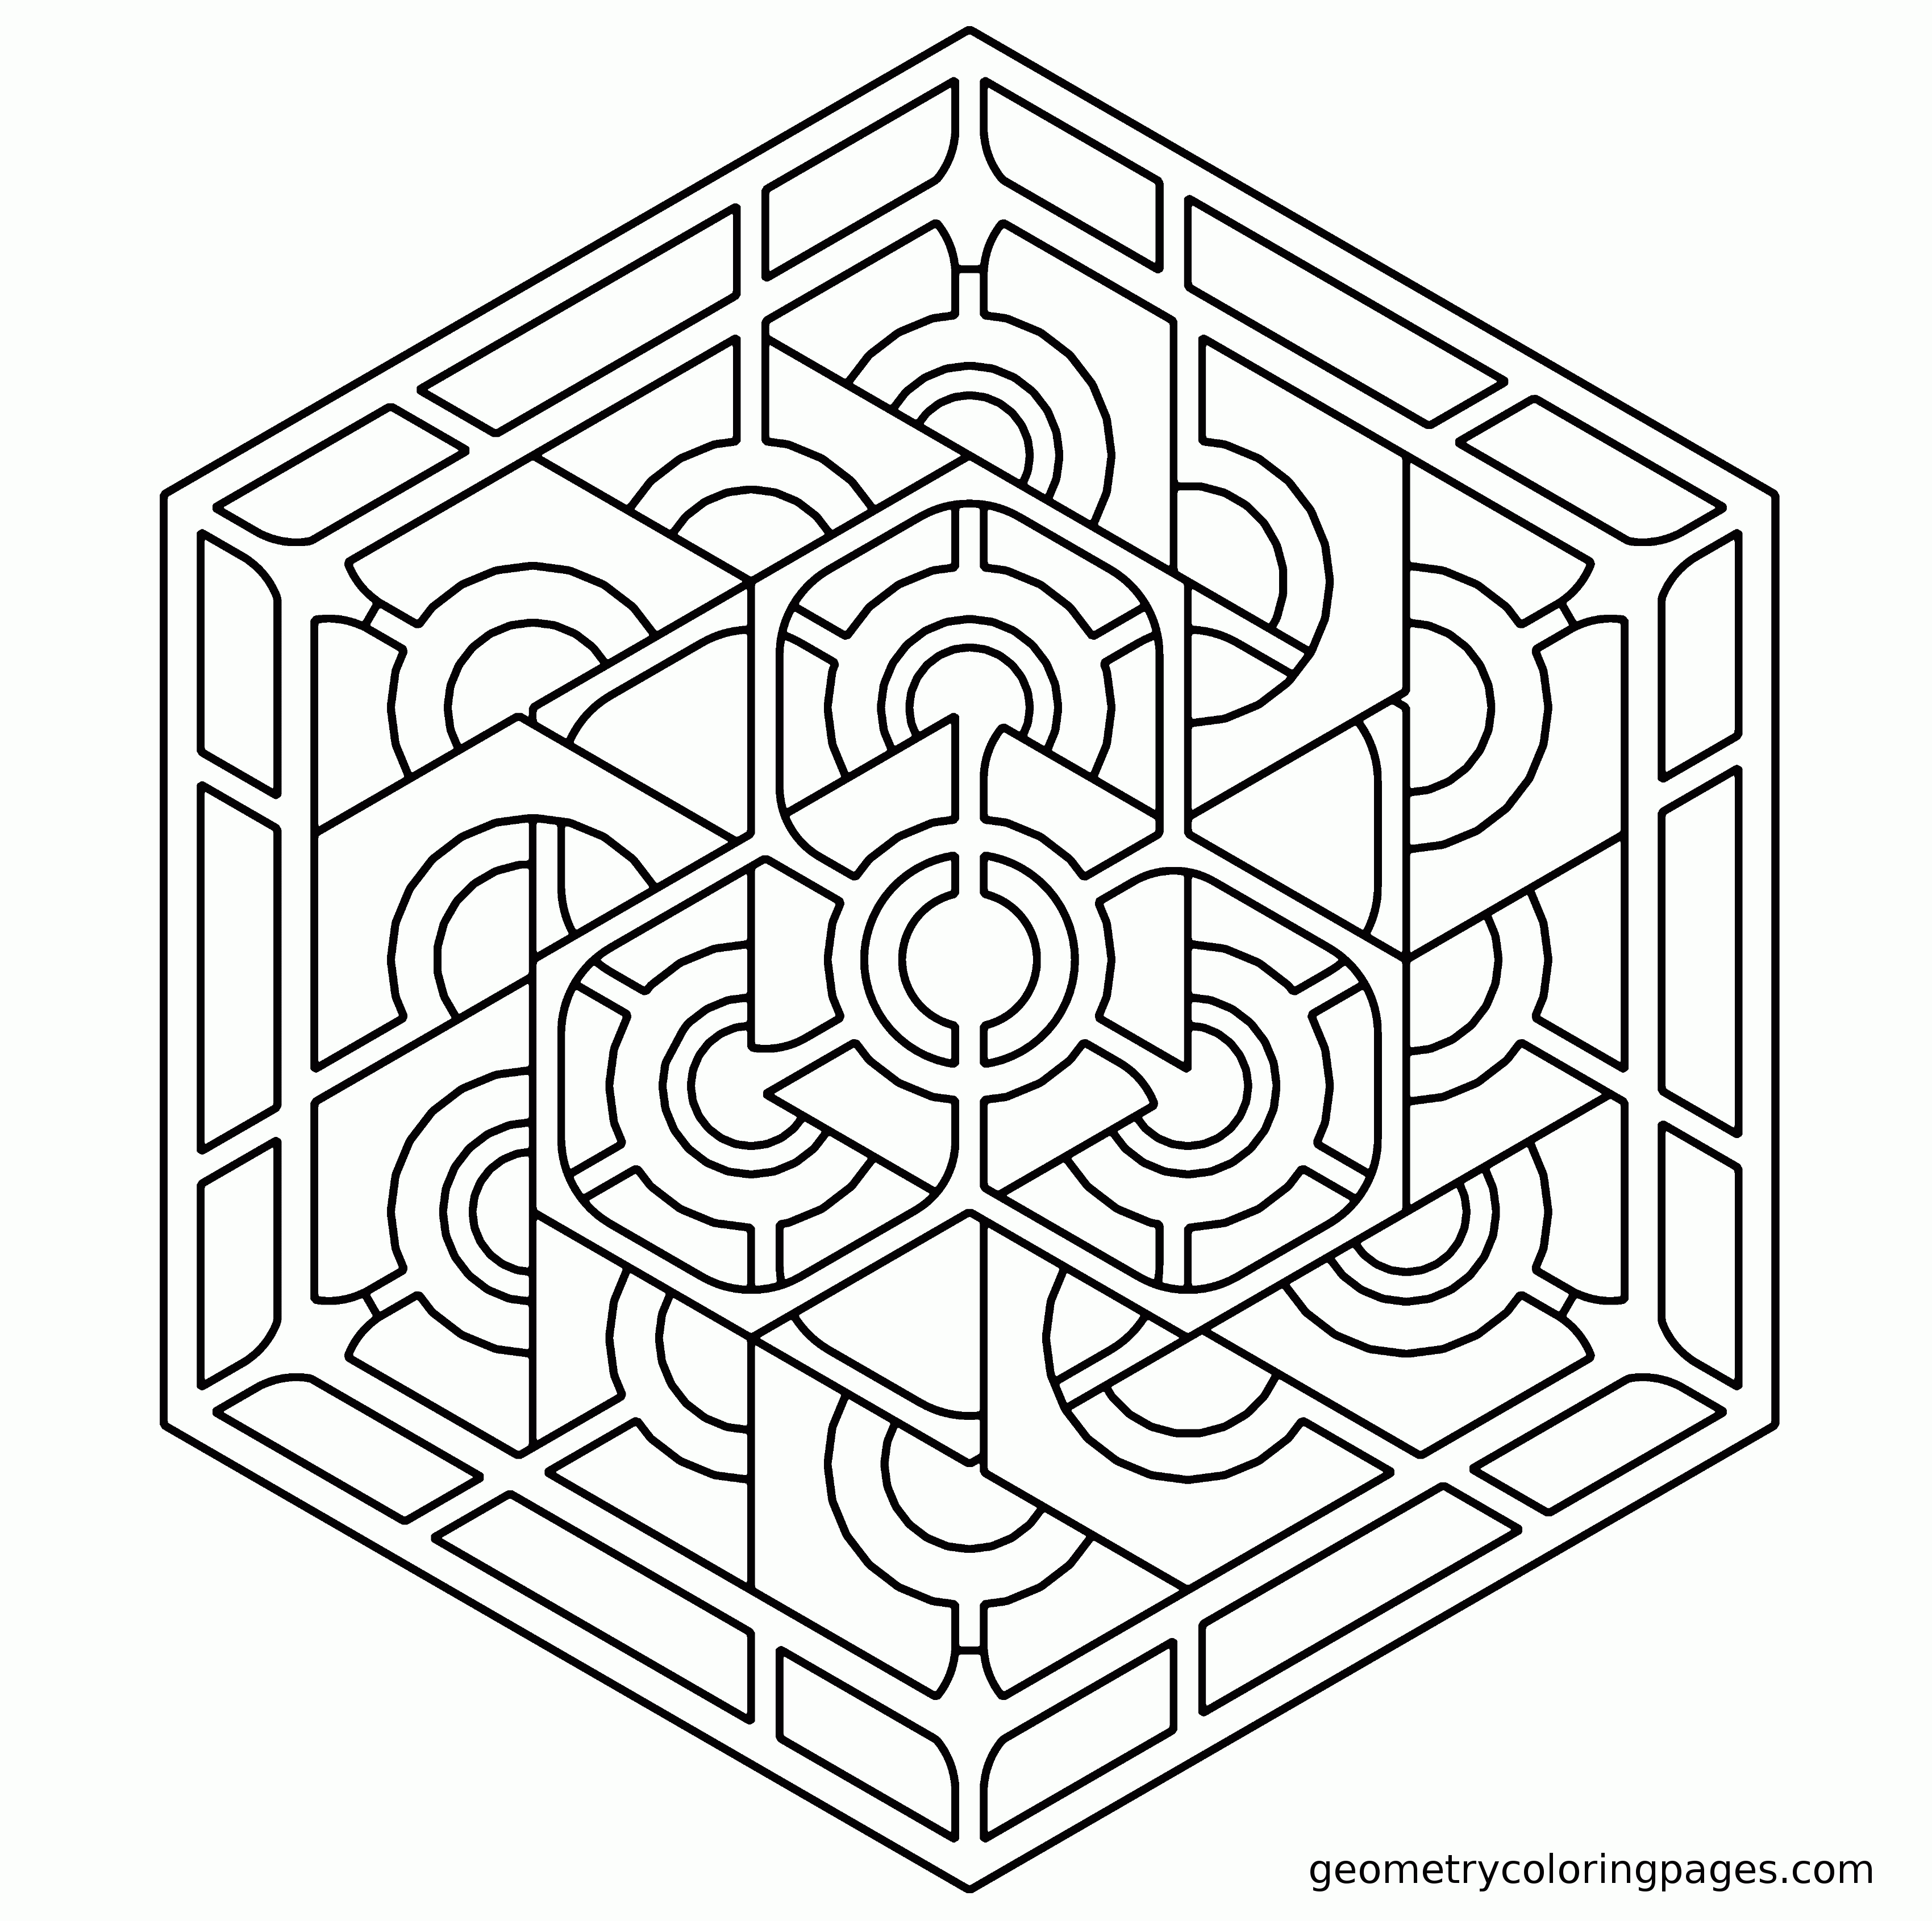 Geometric Coloring Pages - Bestofcoloring.com